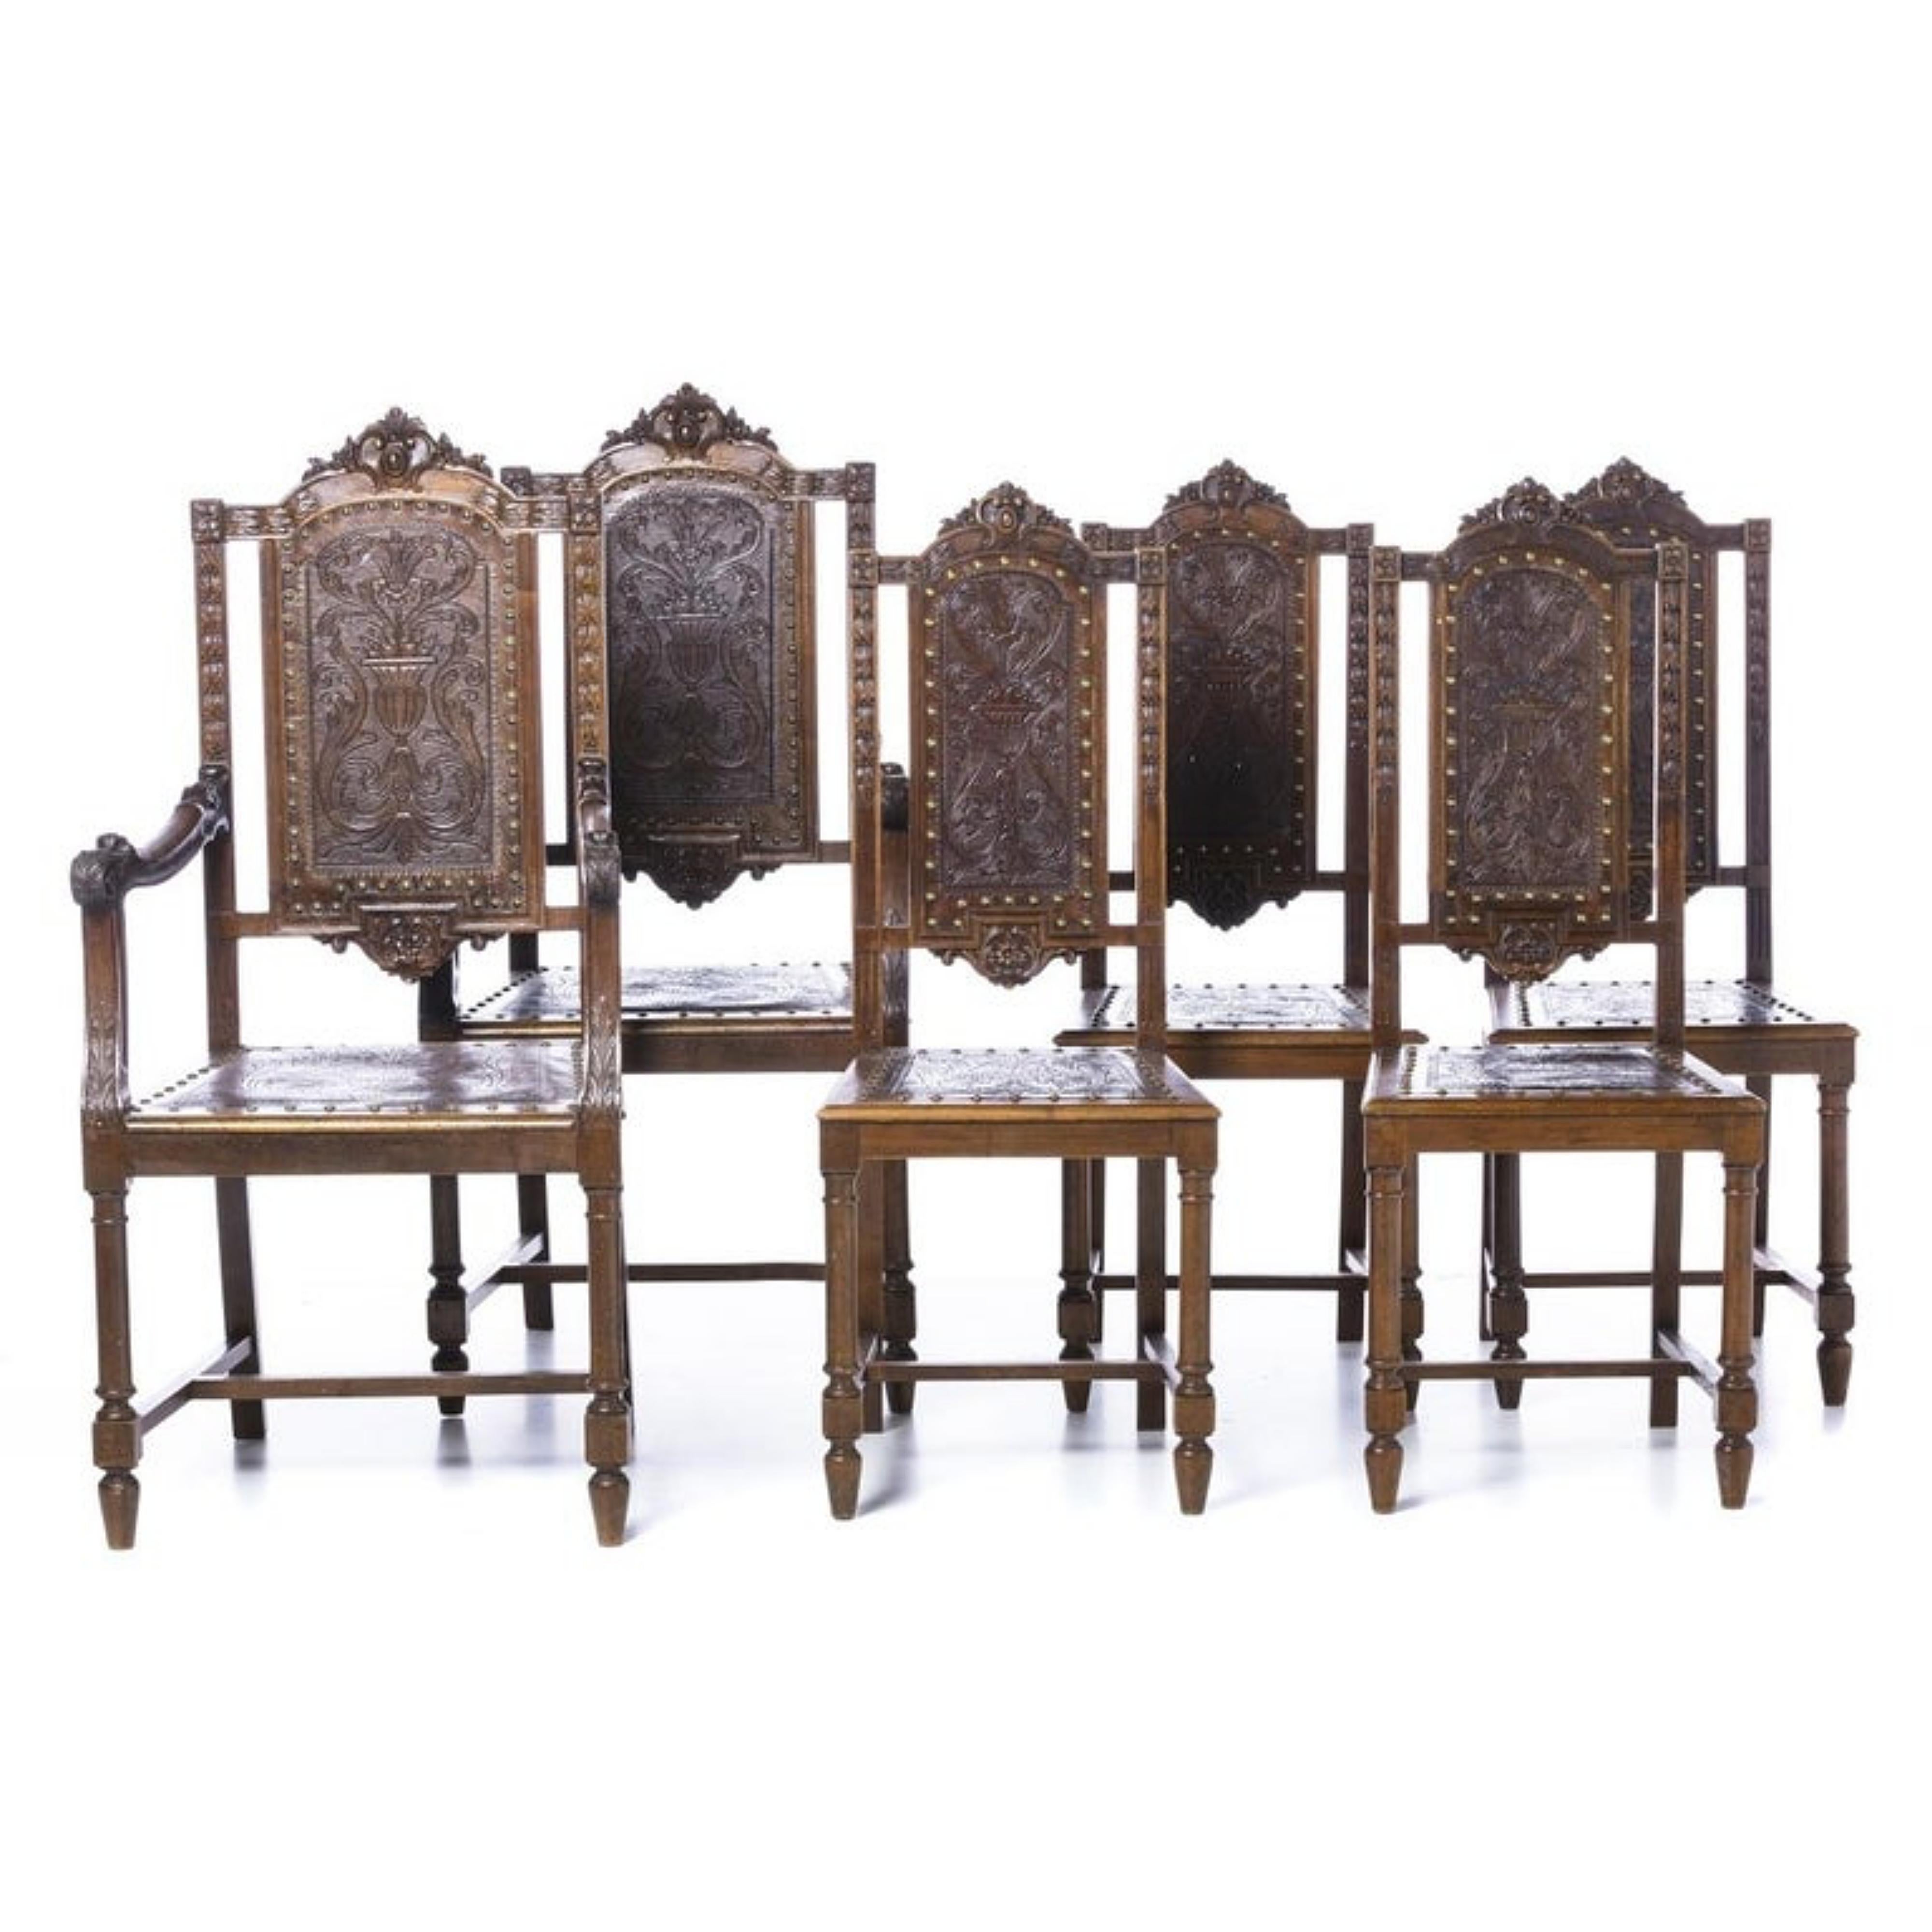 THREE ARMCHAIRS AND SIX CHAIRS

Portuguese,
19th century in carved oak wood, leather seats and back with nailing decorated with plant motifs.
Some defects. 
Dim.: (armchair) 120 x 57.5 x 52 cm.
good condition